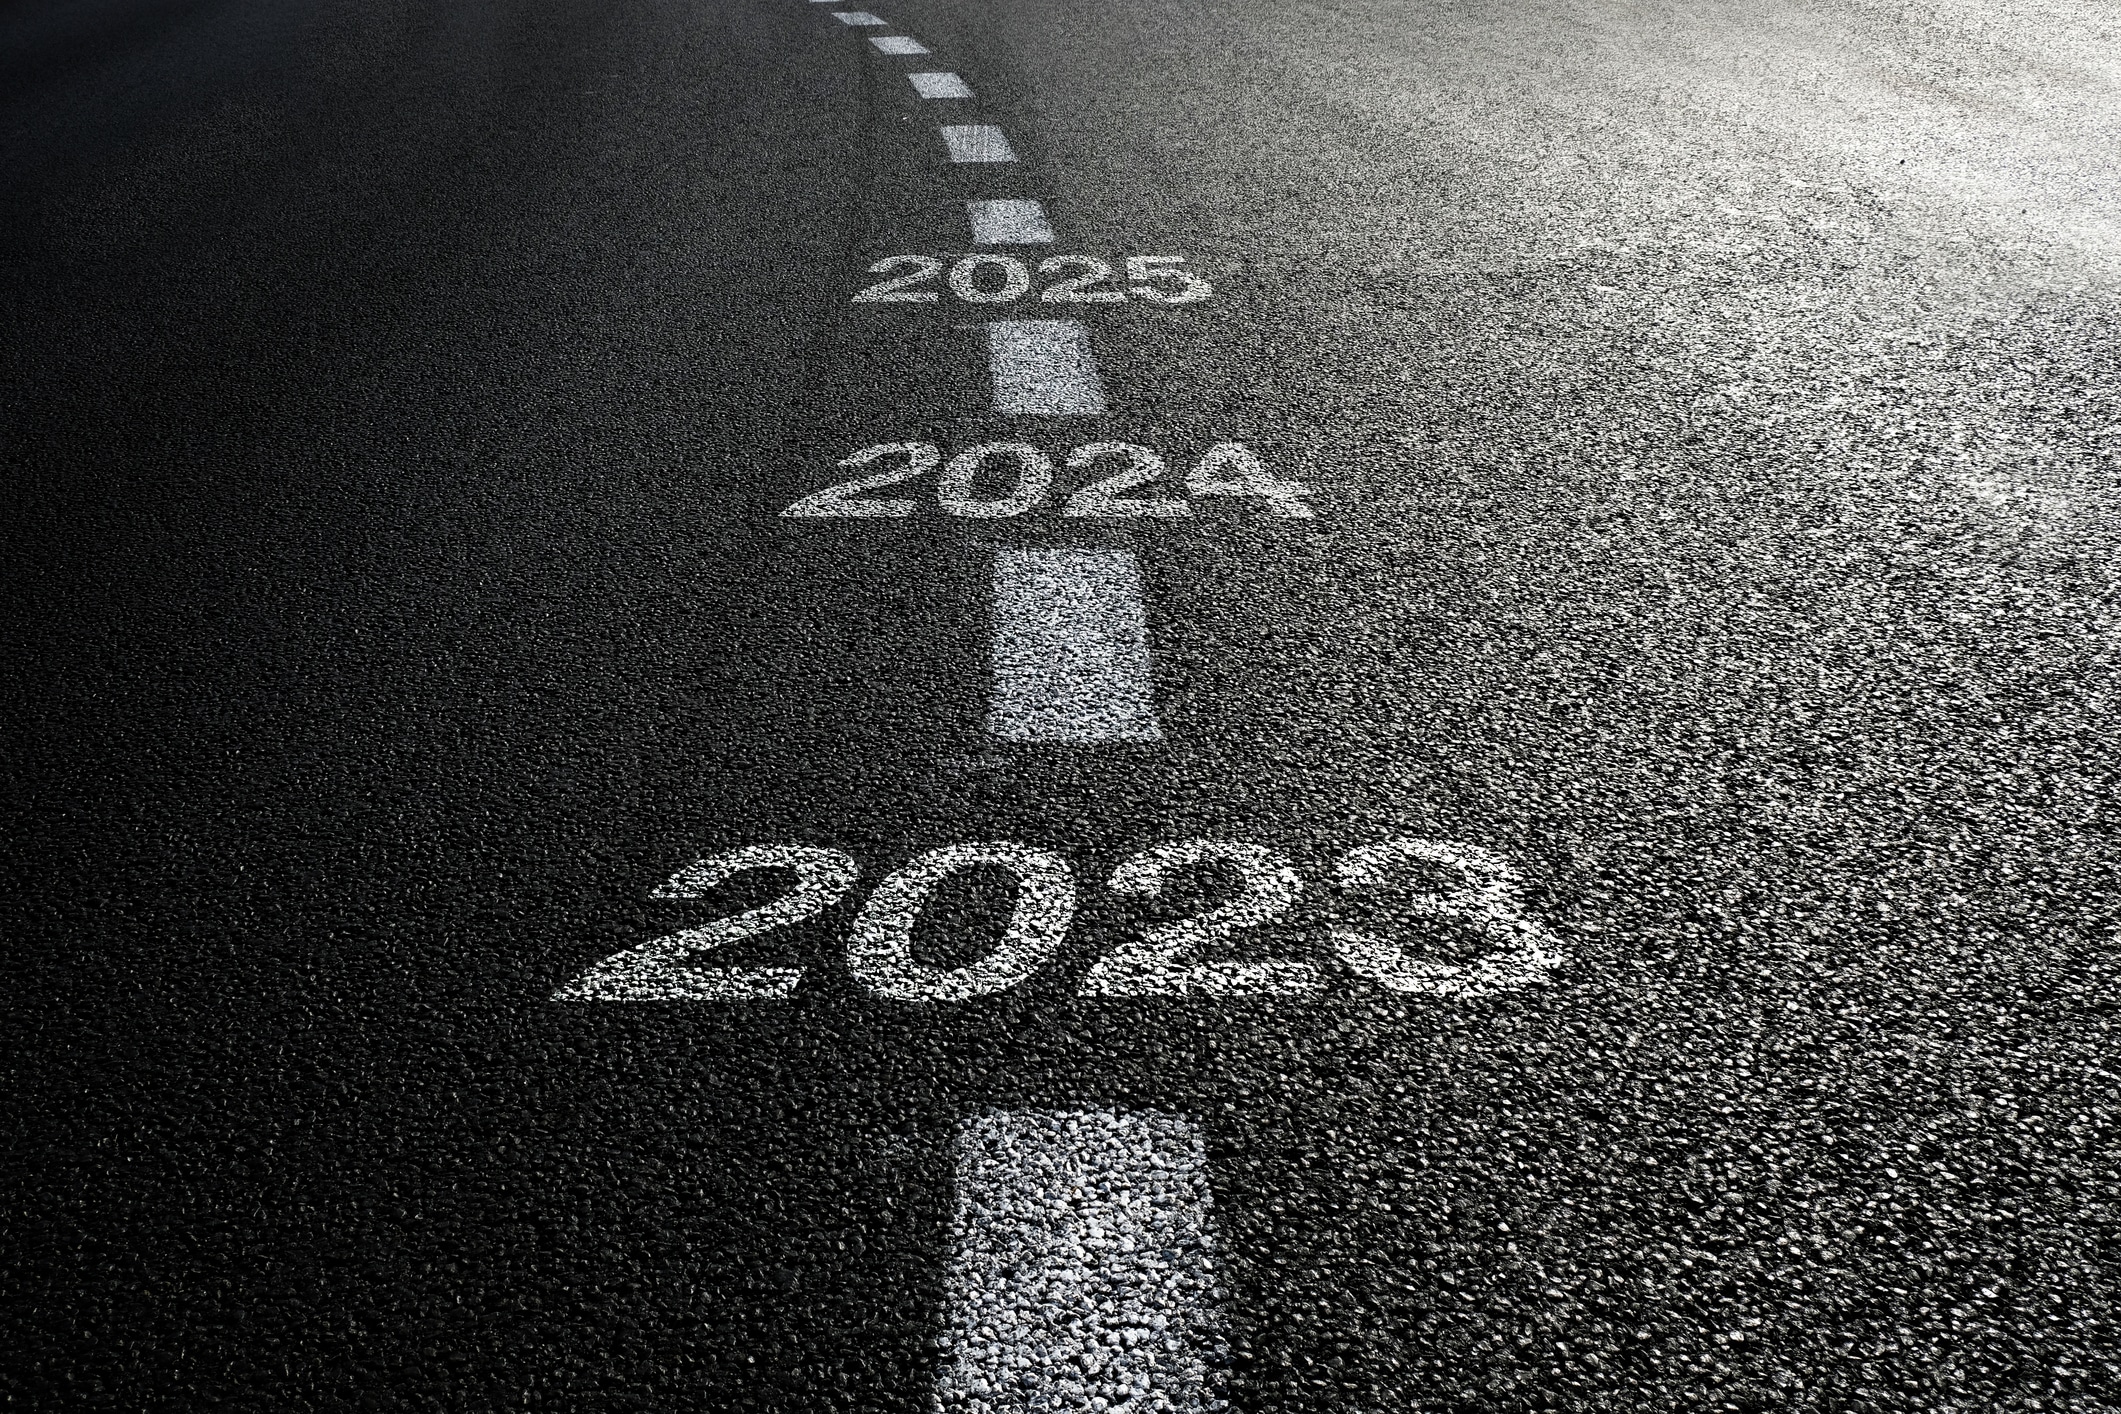 Road with white dashed lines and the numbers 2023, 2024, and 2025 written along the line.